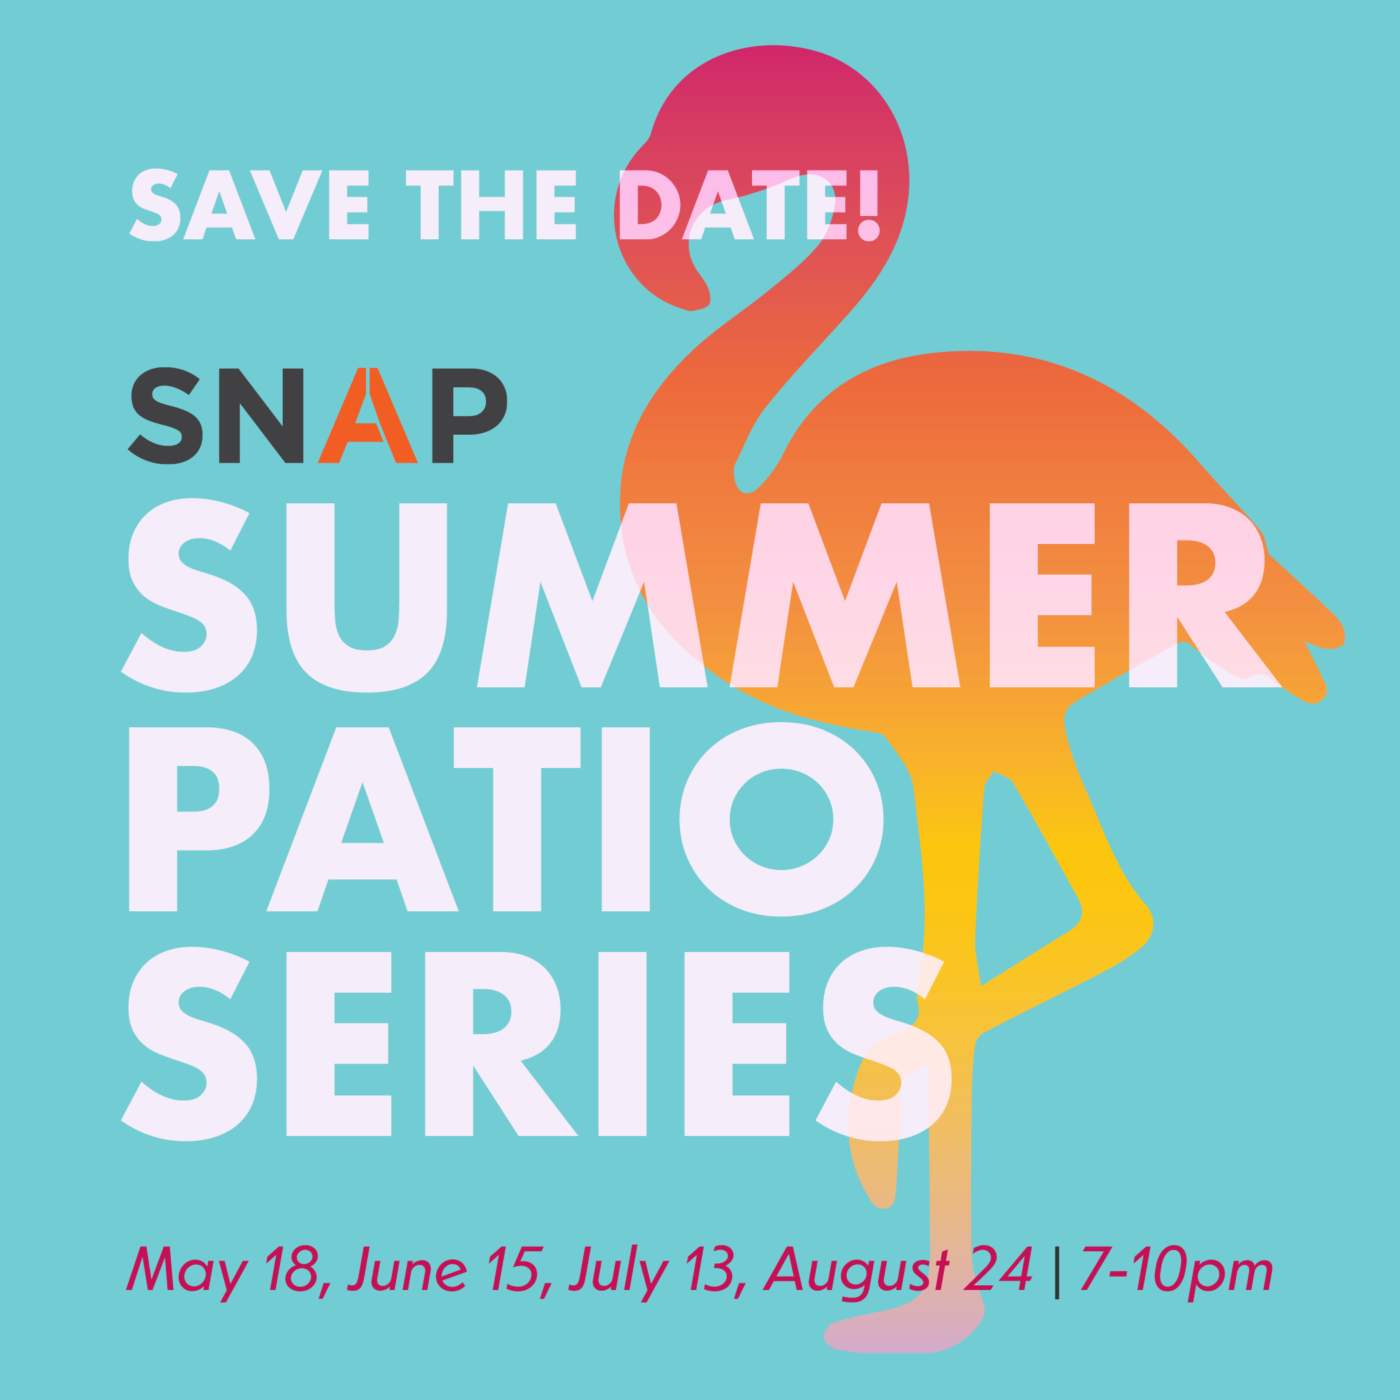 a graphic with a bright blue background featuring the text 'Save the date! SNAP summer patio series: May 18, June 15, July 13, August 24, 7-10pm". a silhouette of a flamingo with a pink, orange and yellow gradient